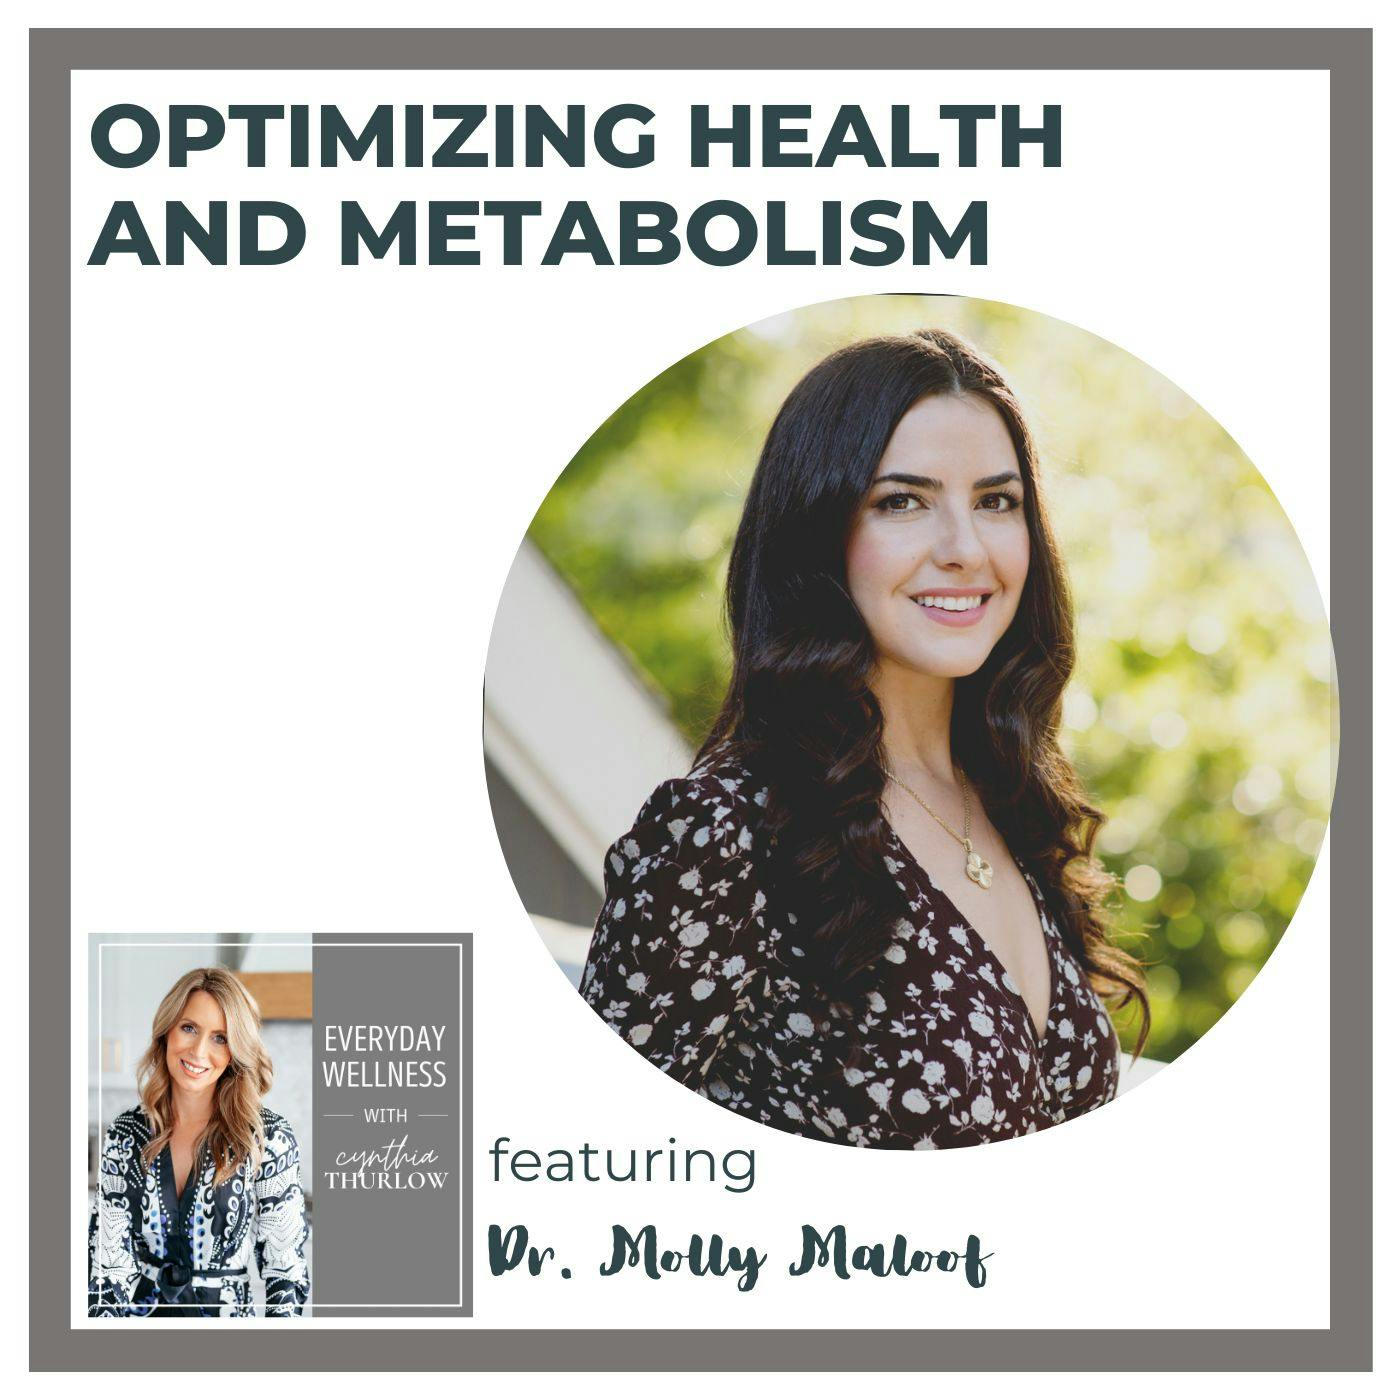 Ep. 312 Optimizing Health and Metabolism with Dr. Molly Maloof